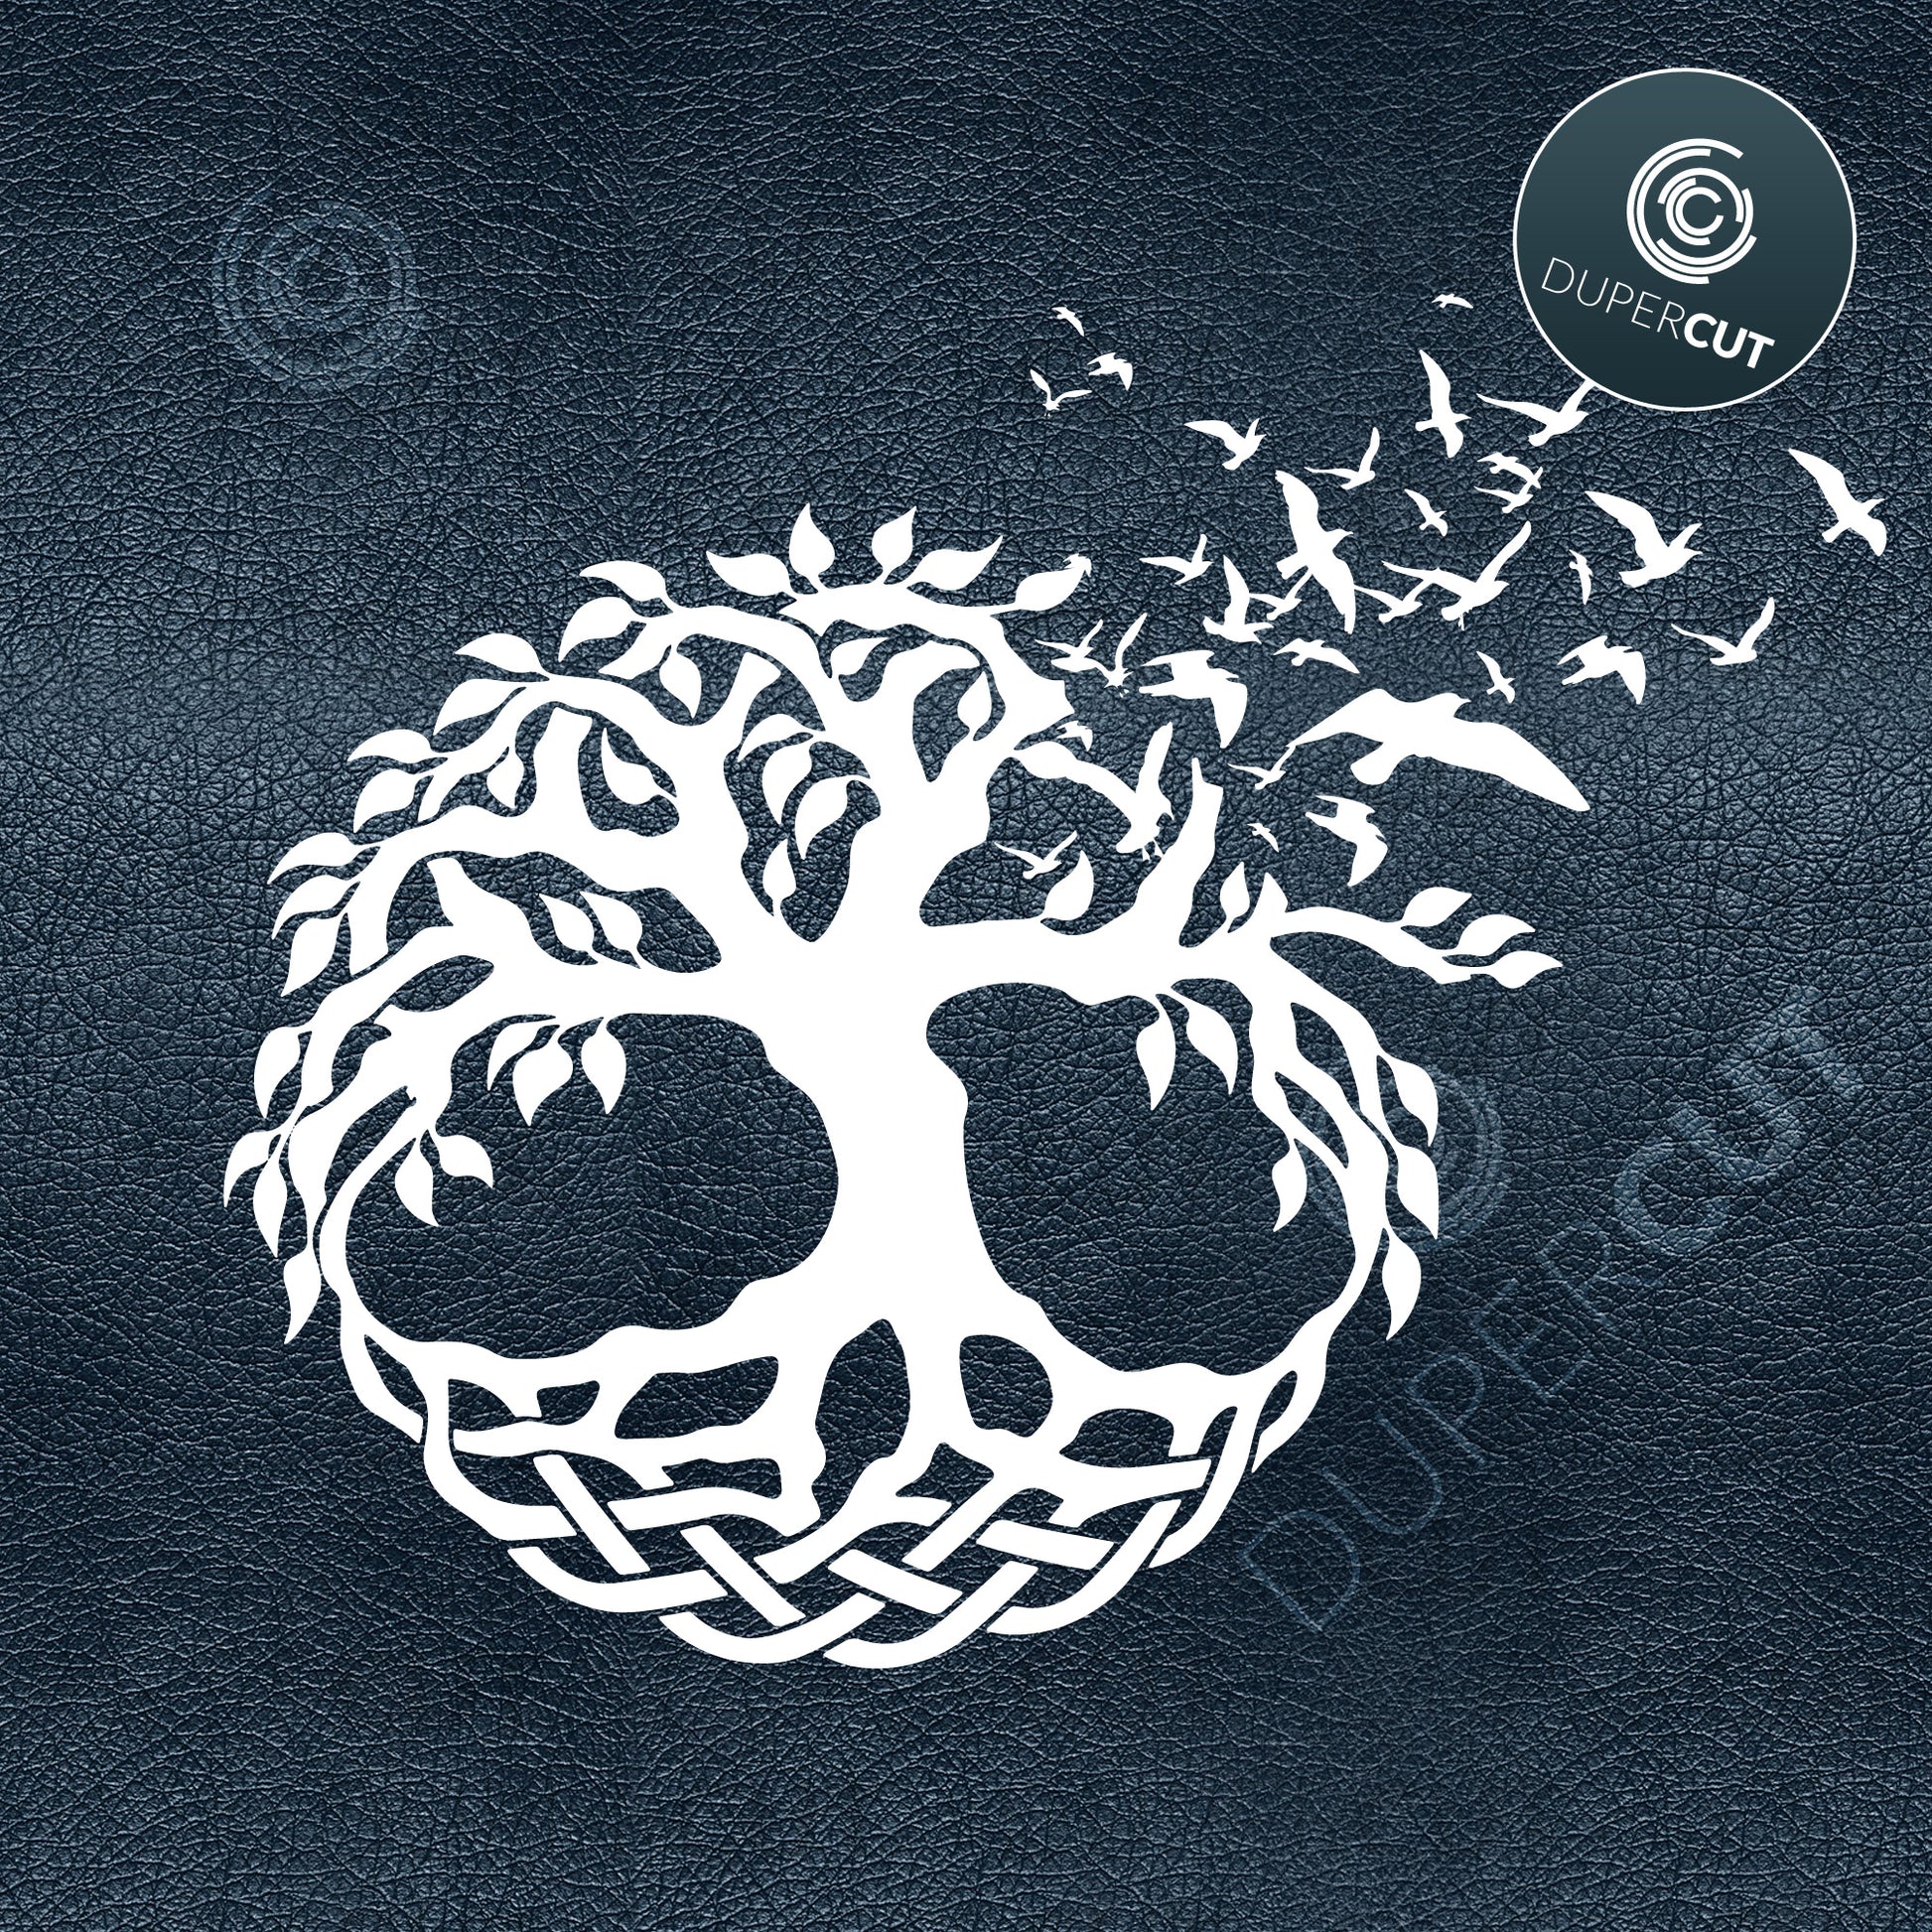 SVG PNG DXF Tree of life with flying birds - paper cutting template, print on demand files, for Cricut, Grlowforge, Silhouette